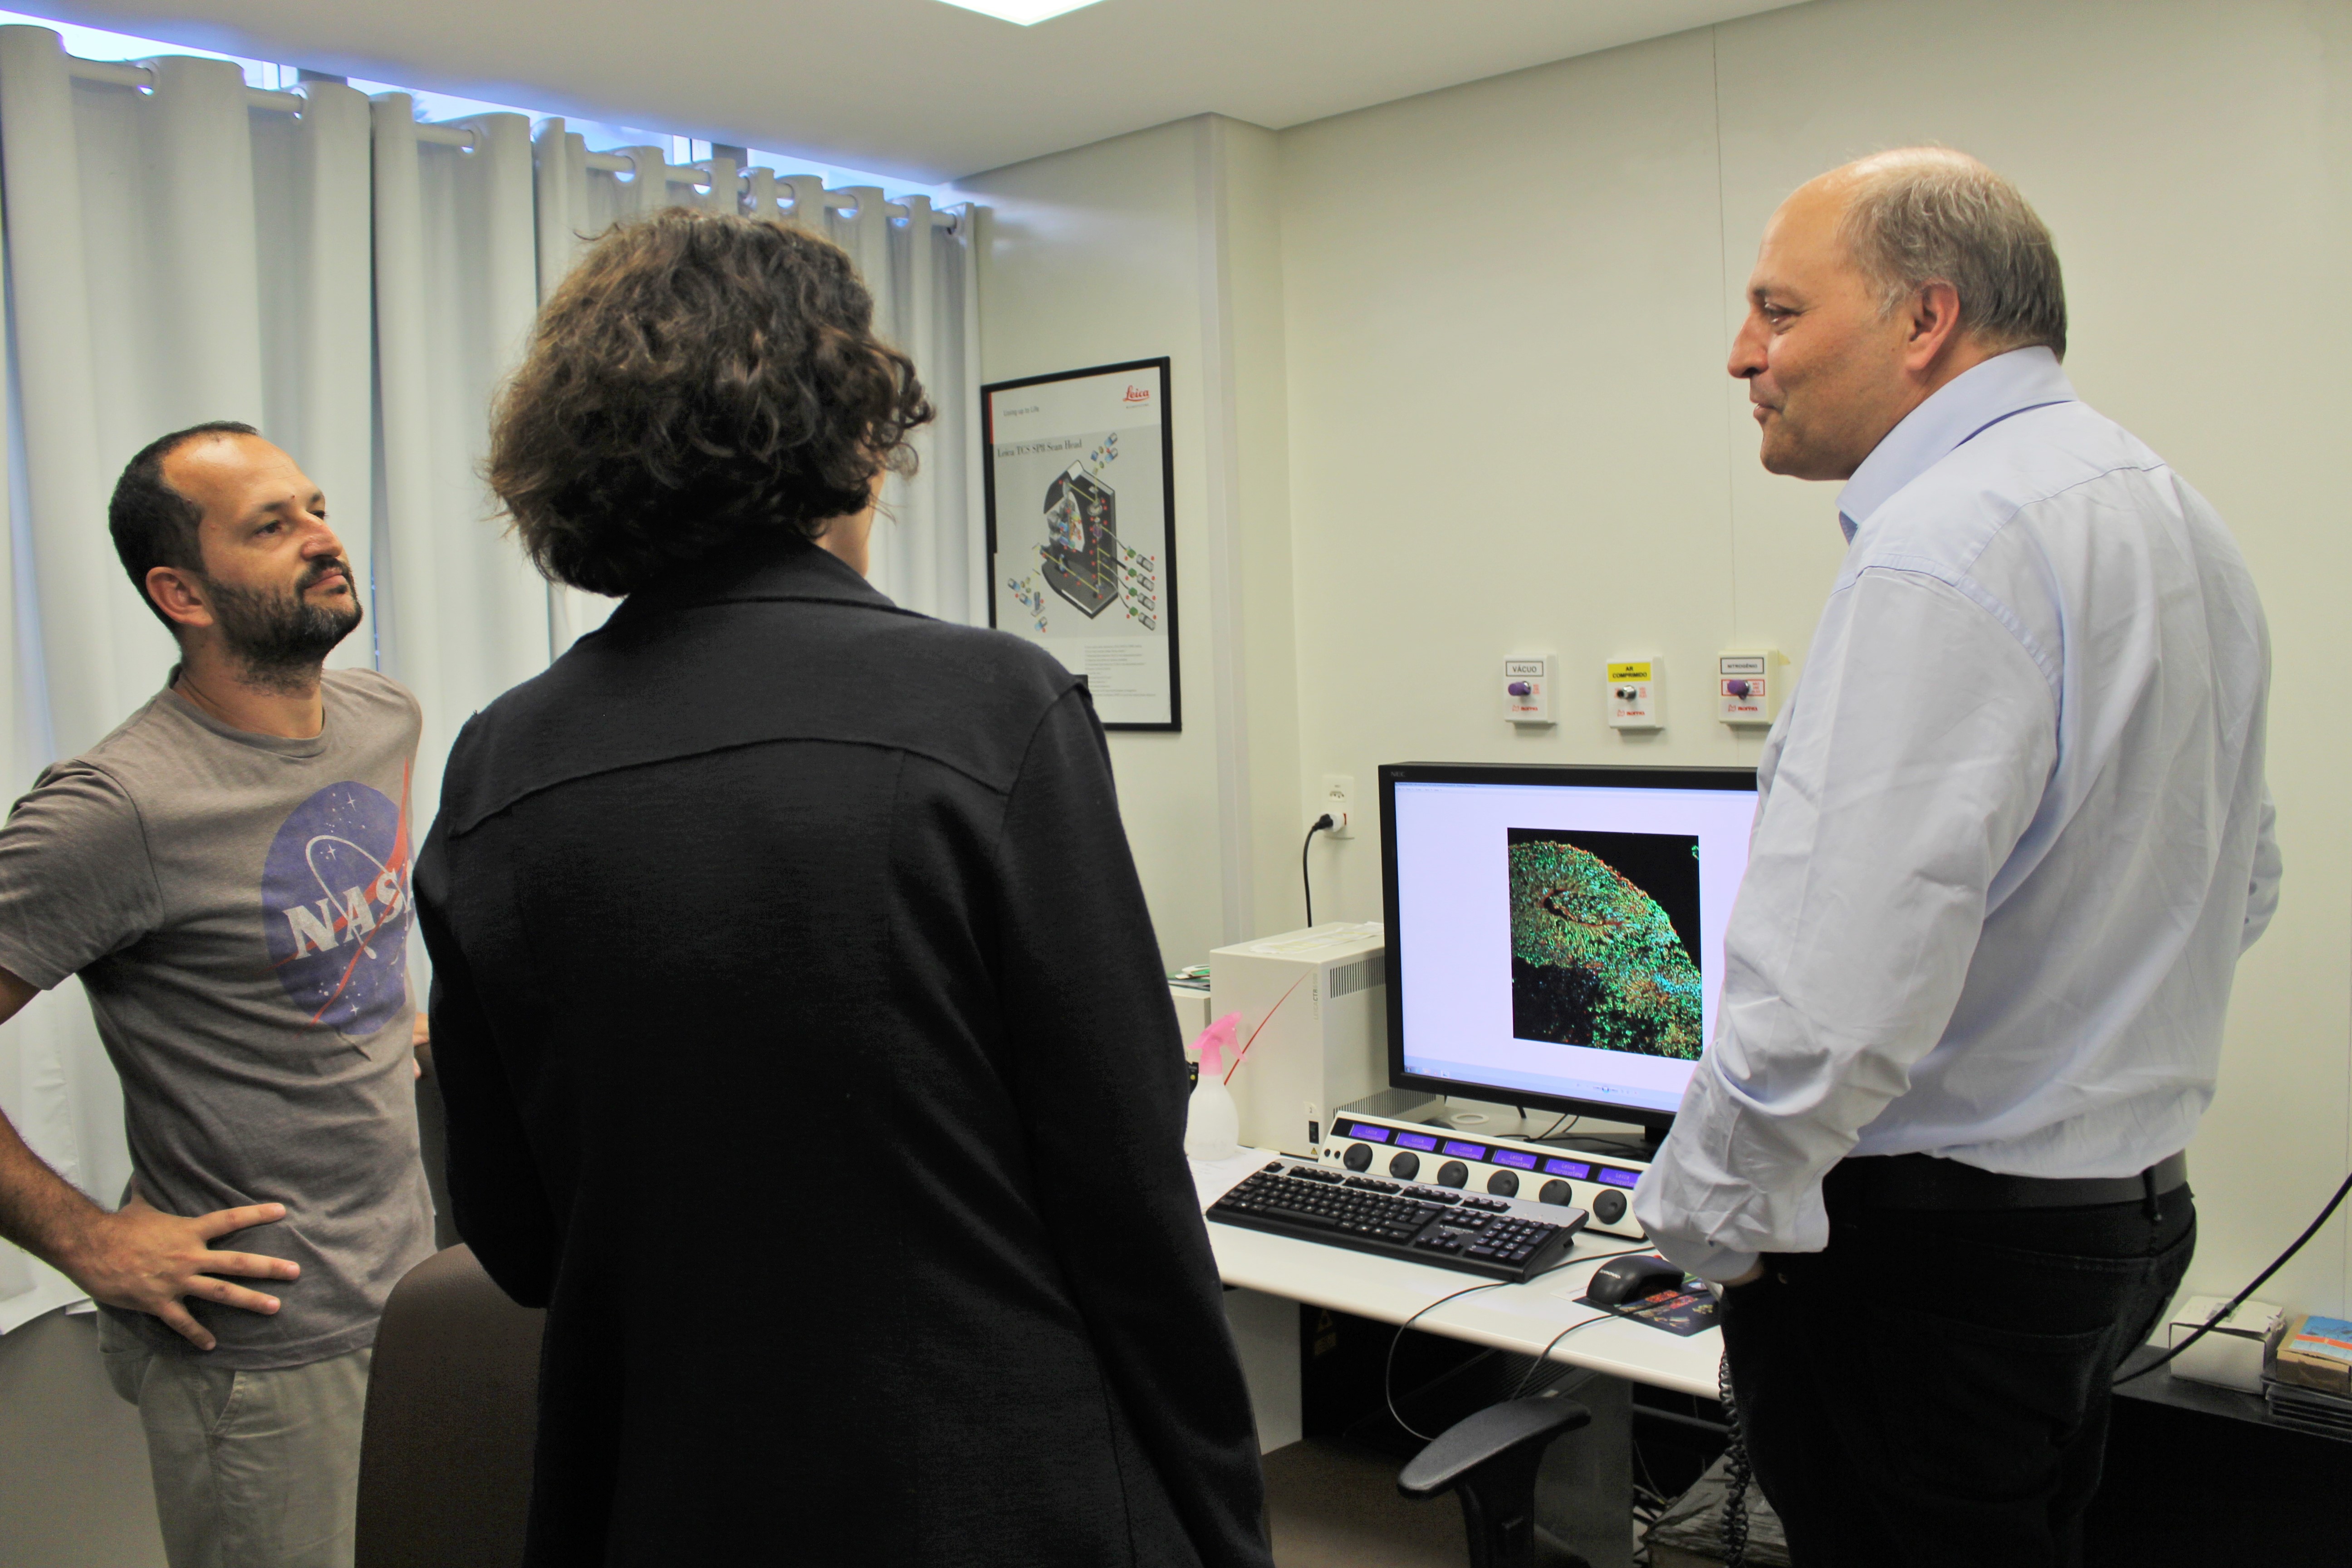 Researchers at IDOR gave Brecht (right) a tour of their research labs